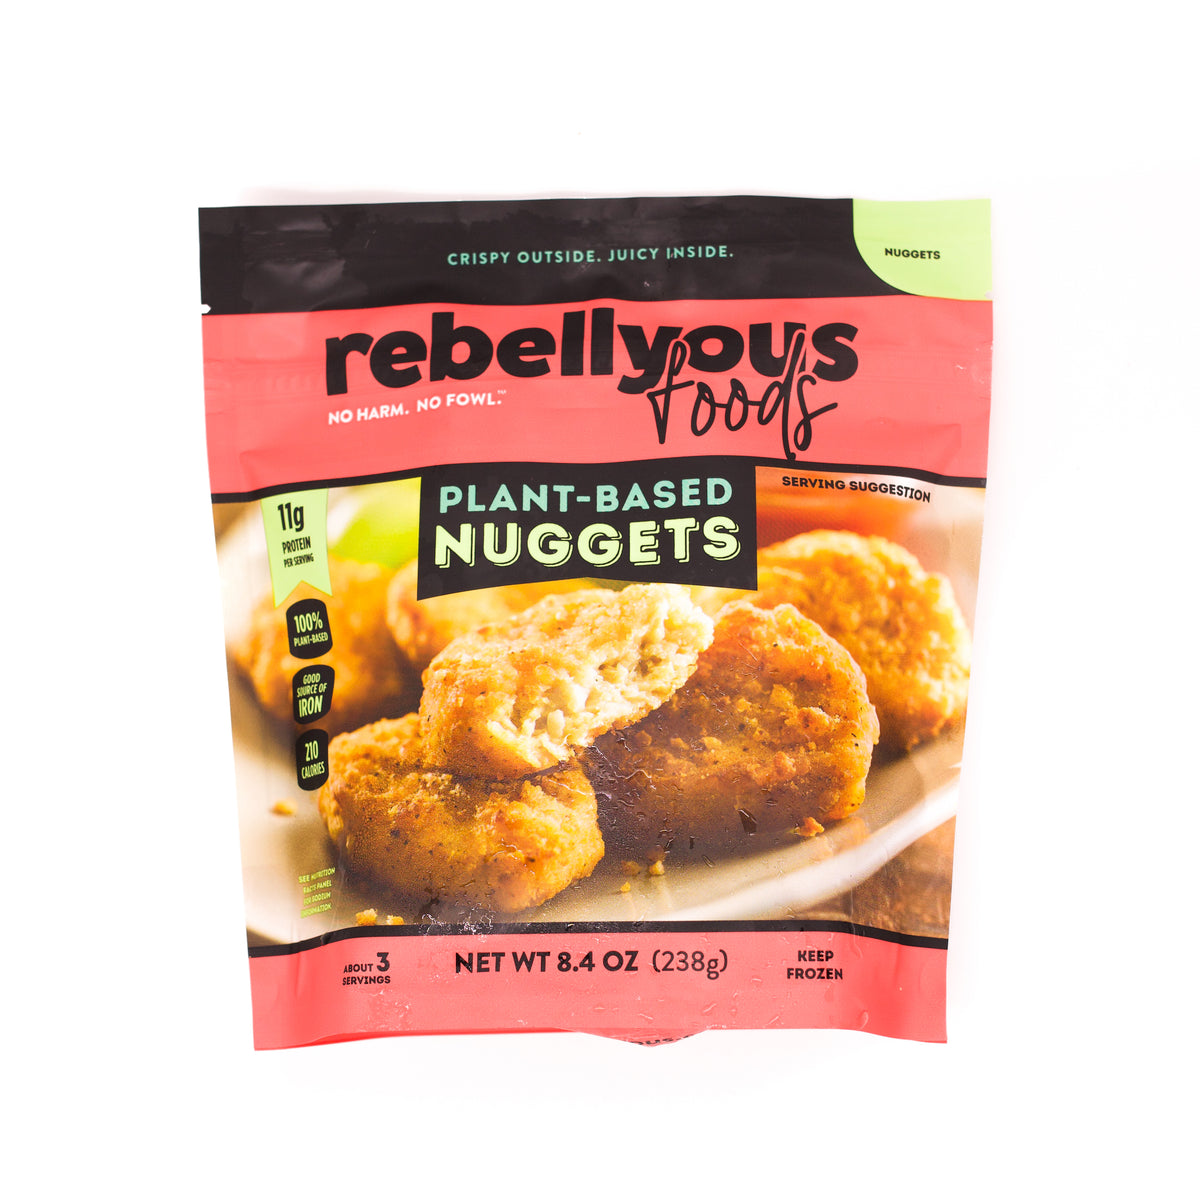 Rebellyous Chicken Nuggets